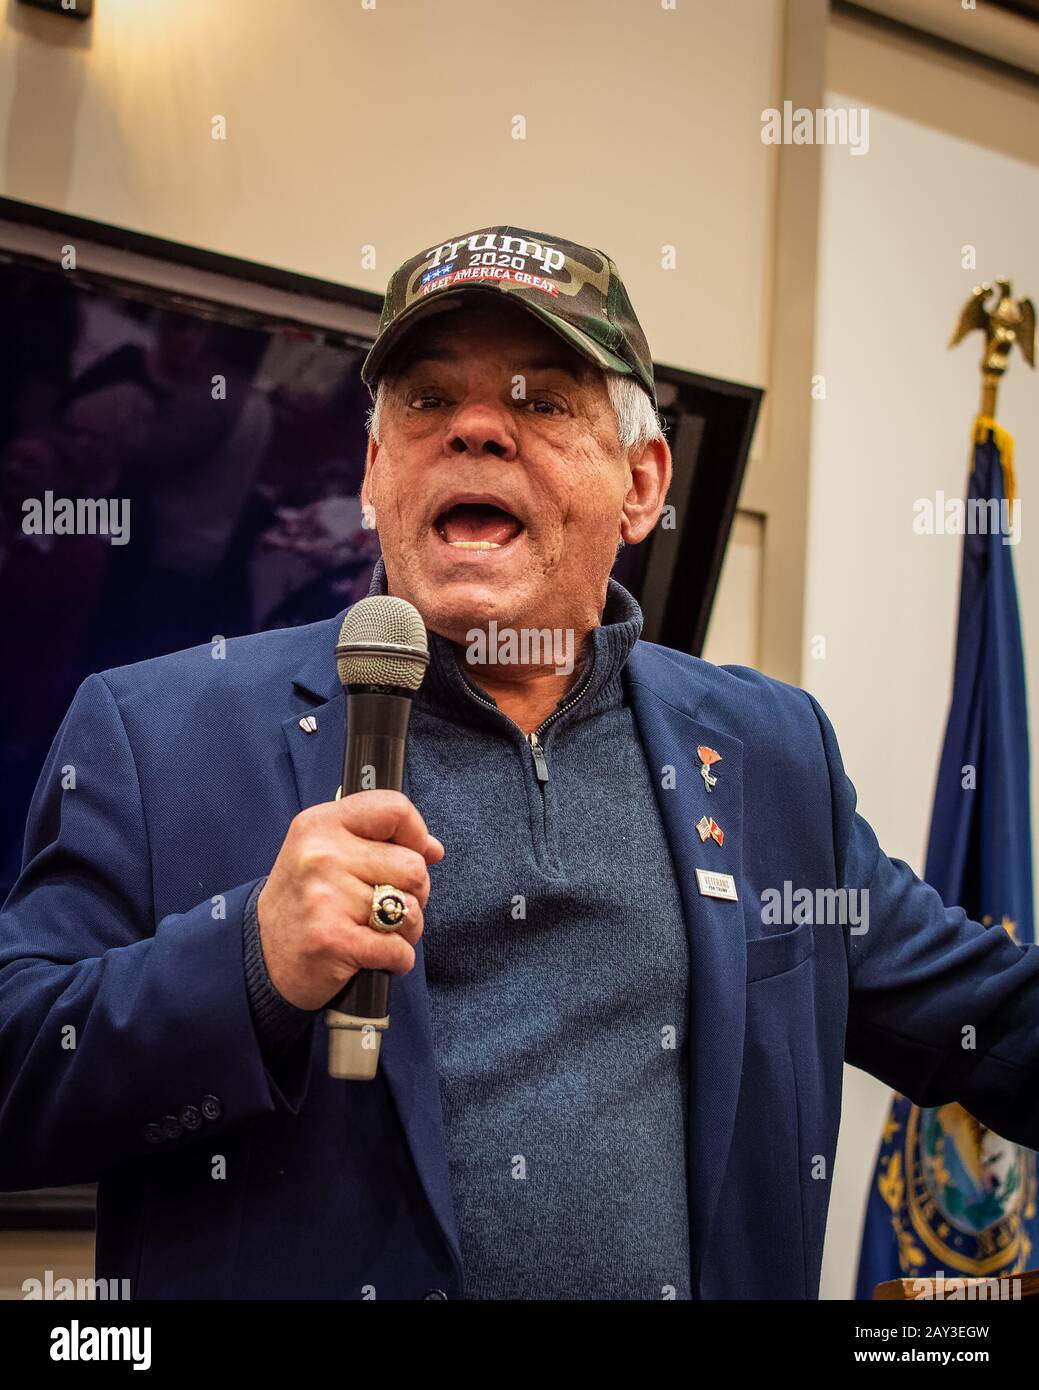 New Hampshire House of Representatives Al Baldasaro speaks from a podium in NH during the GOP 2020 primary celebration. Stock Photo